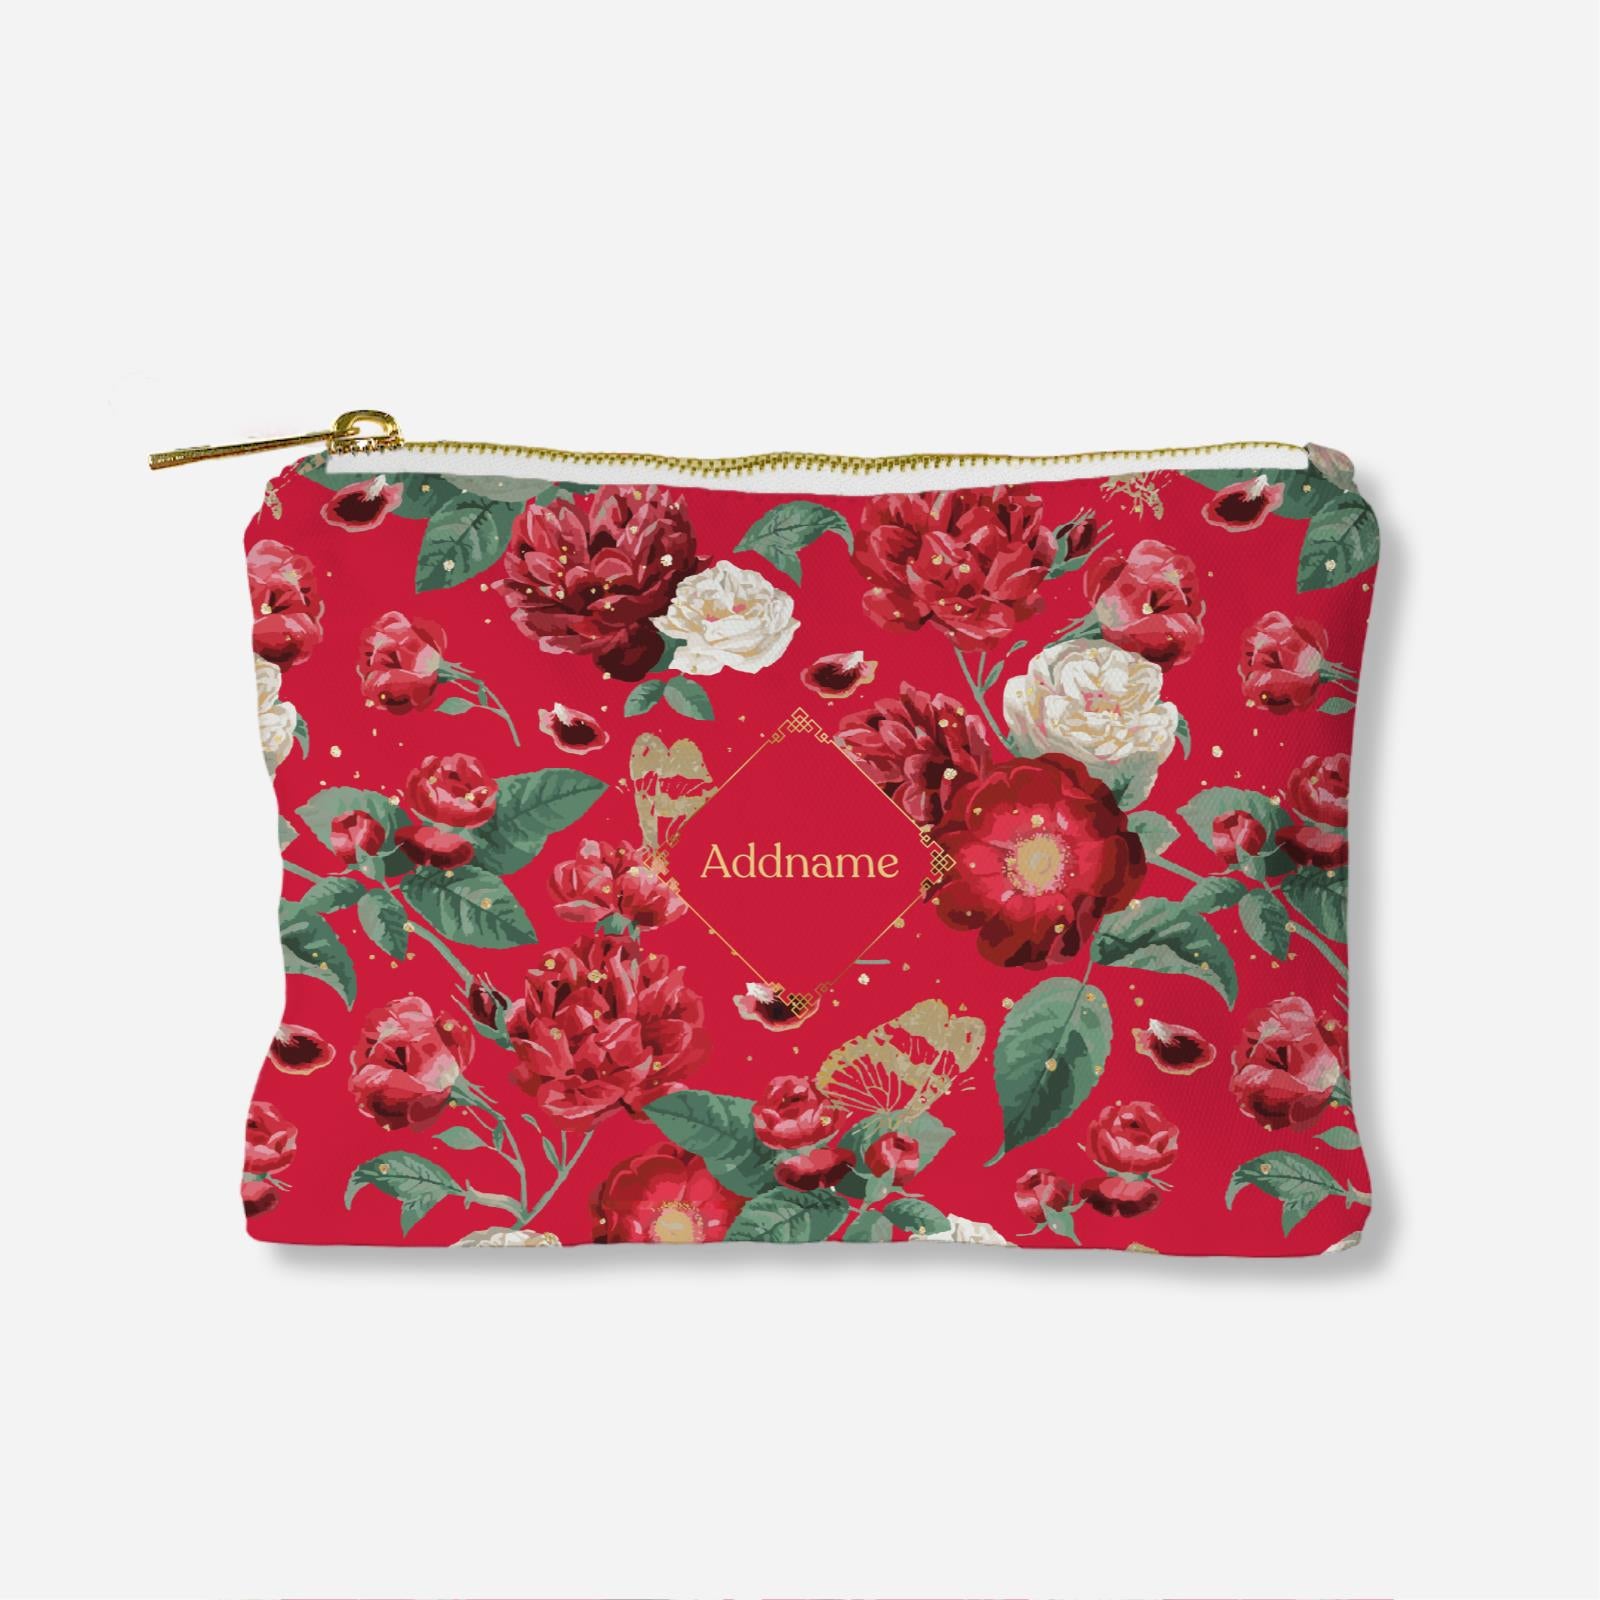 Royal Floral - Red Full Print Zipper Pouch With English Personalization